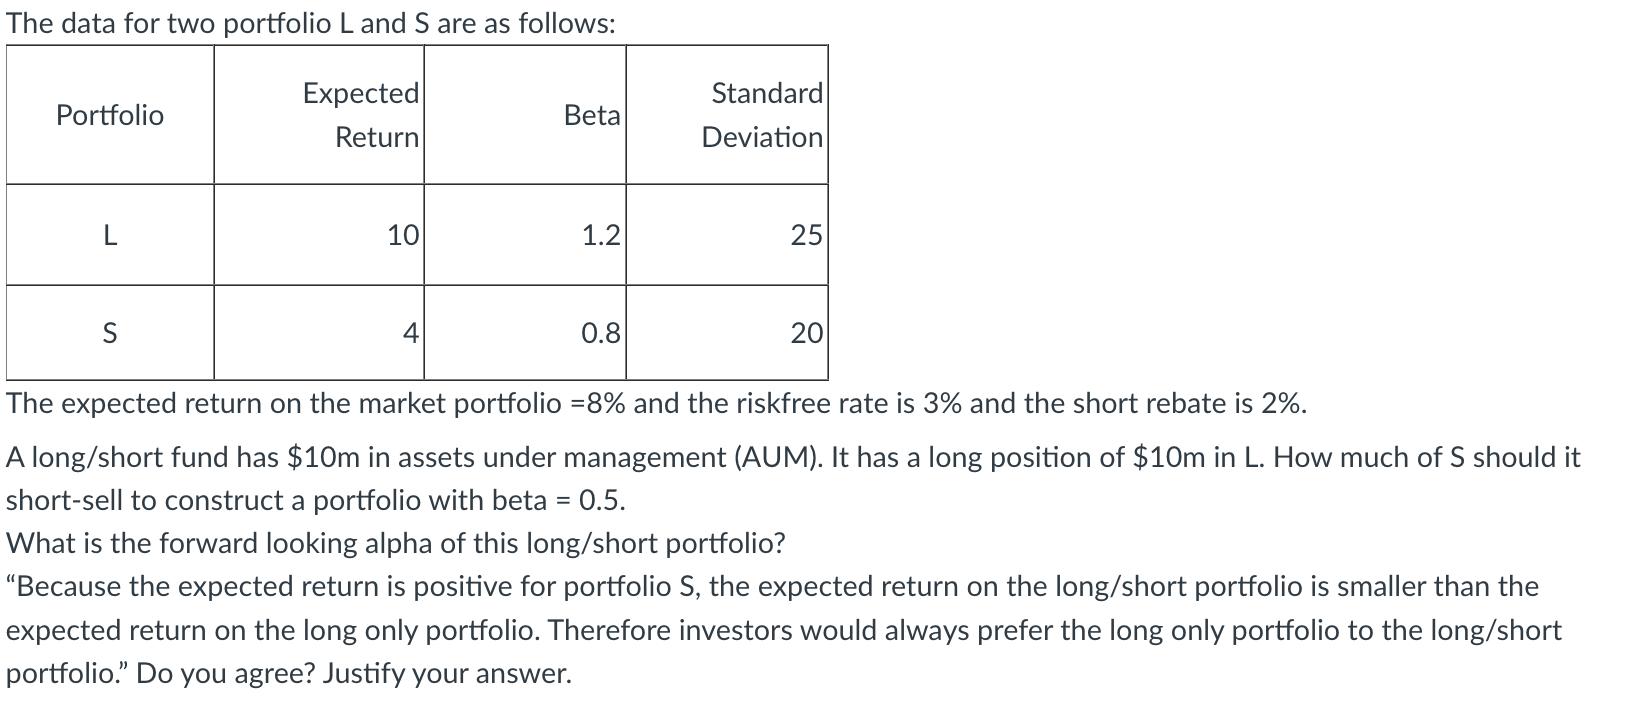 The data for two portfolio L and S are as follows: Expected Return Portfolio L S 10 4 Beta 1.2 0.8 Standard